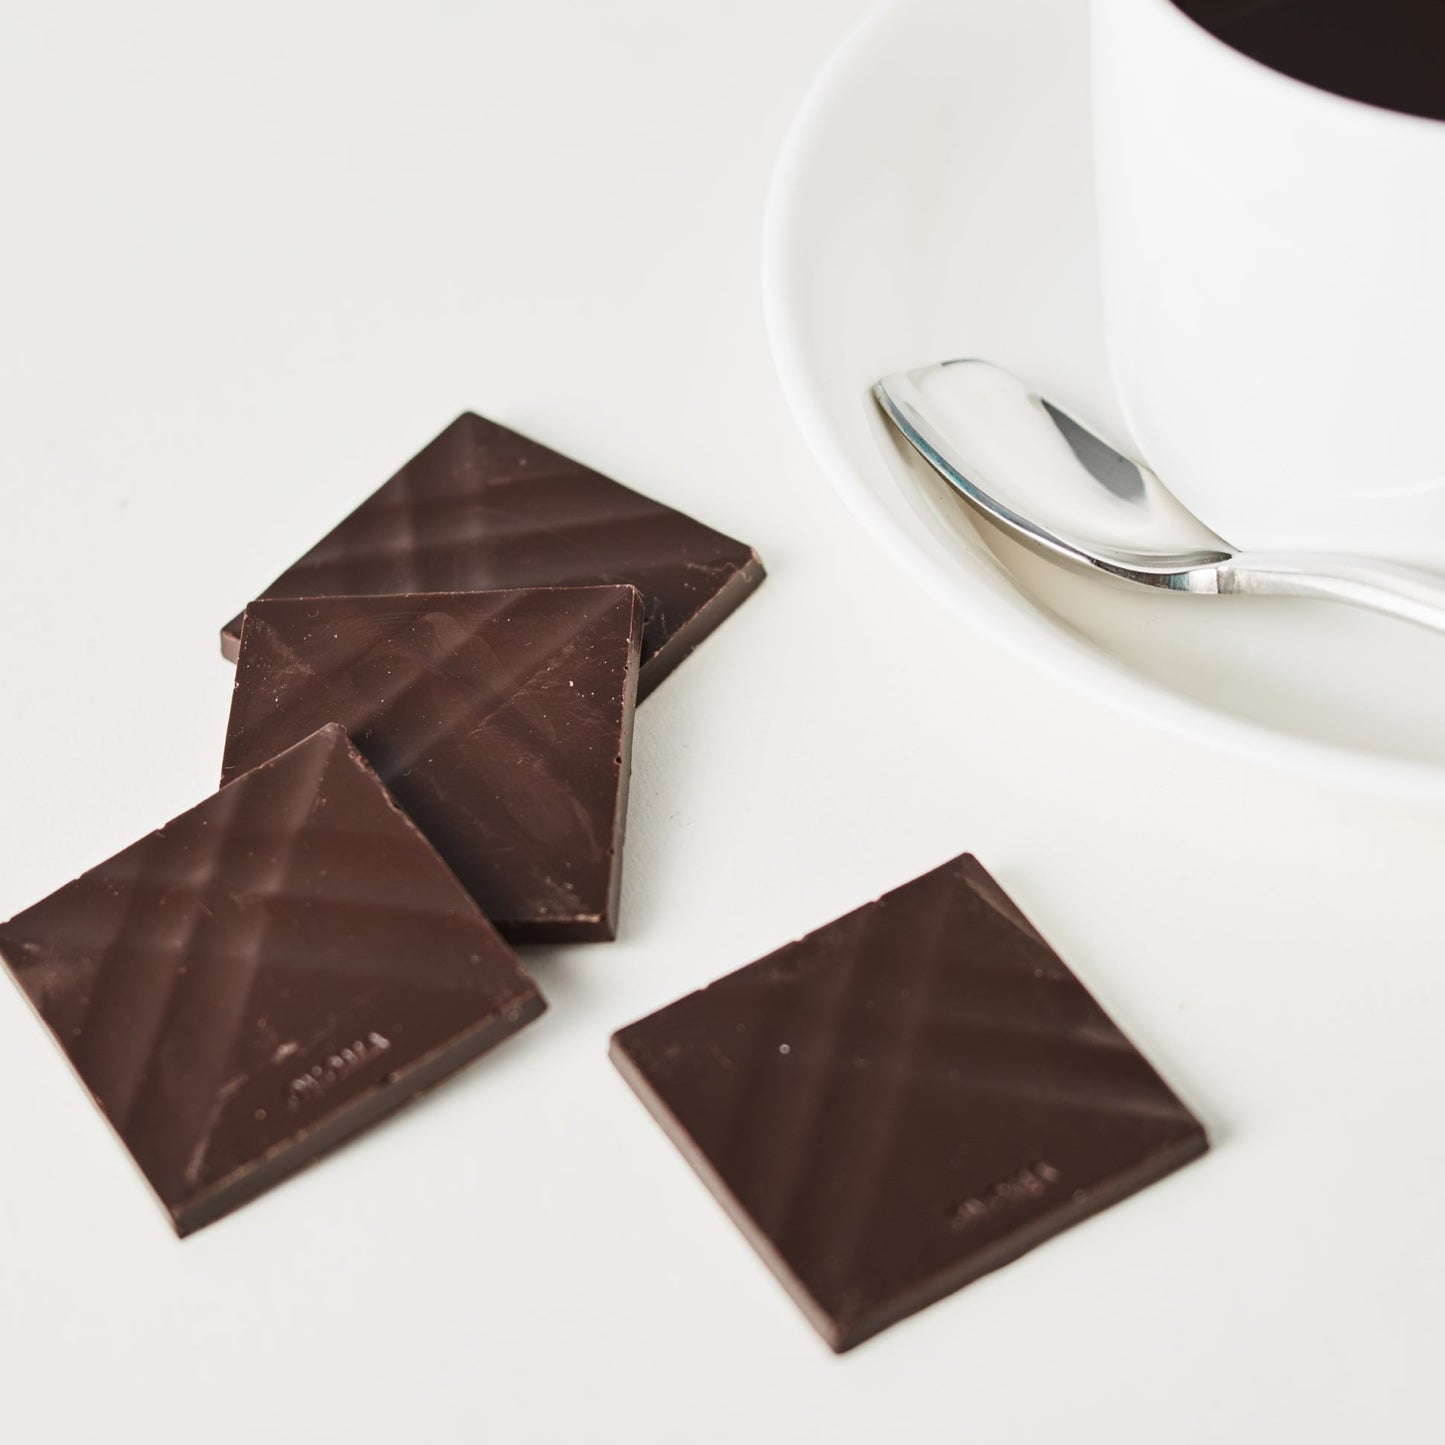 A photo of the sugar free dark chocolate next to a cup of coffee